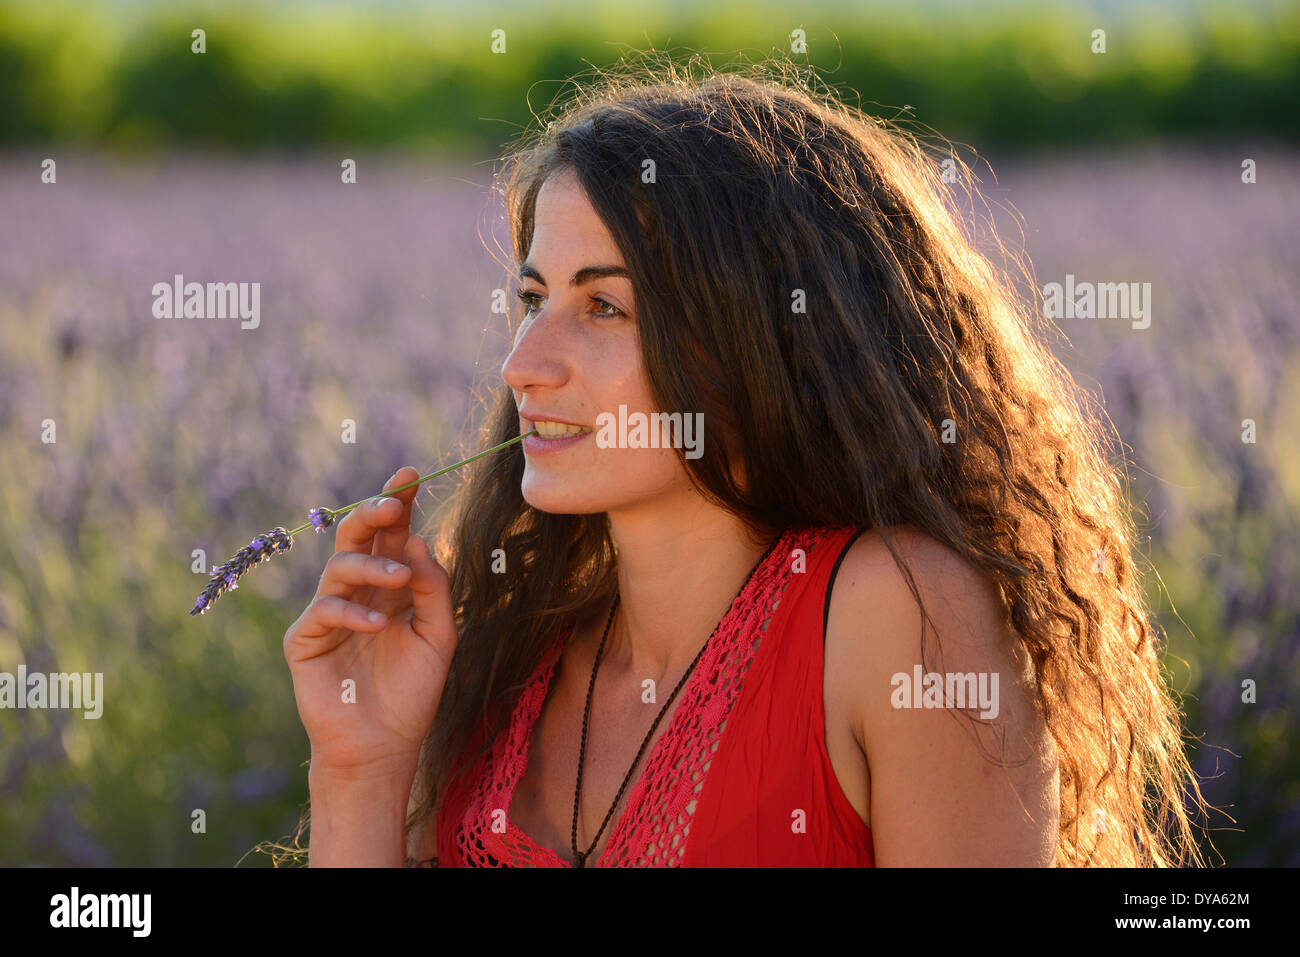 Europe France Provence Vaucluse lavender field woman walk red dress bloom blooming nature girl walking french brunette hat Stock Photo